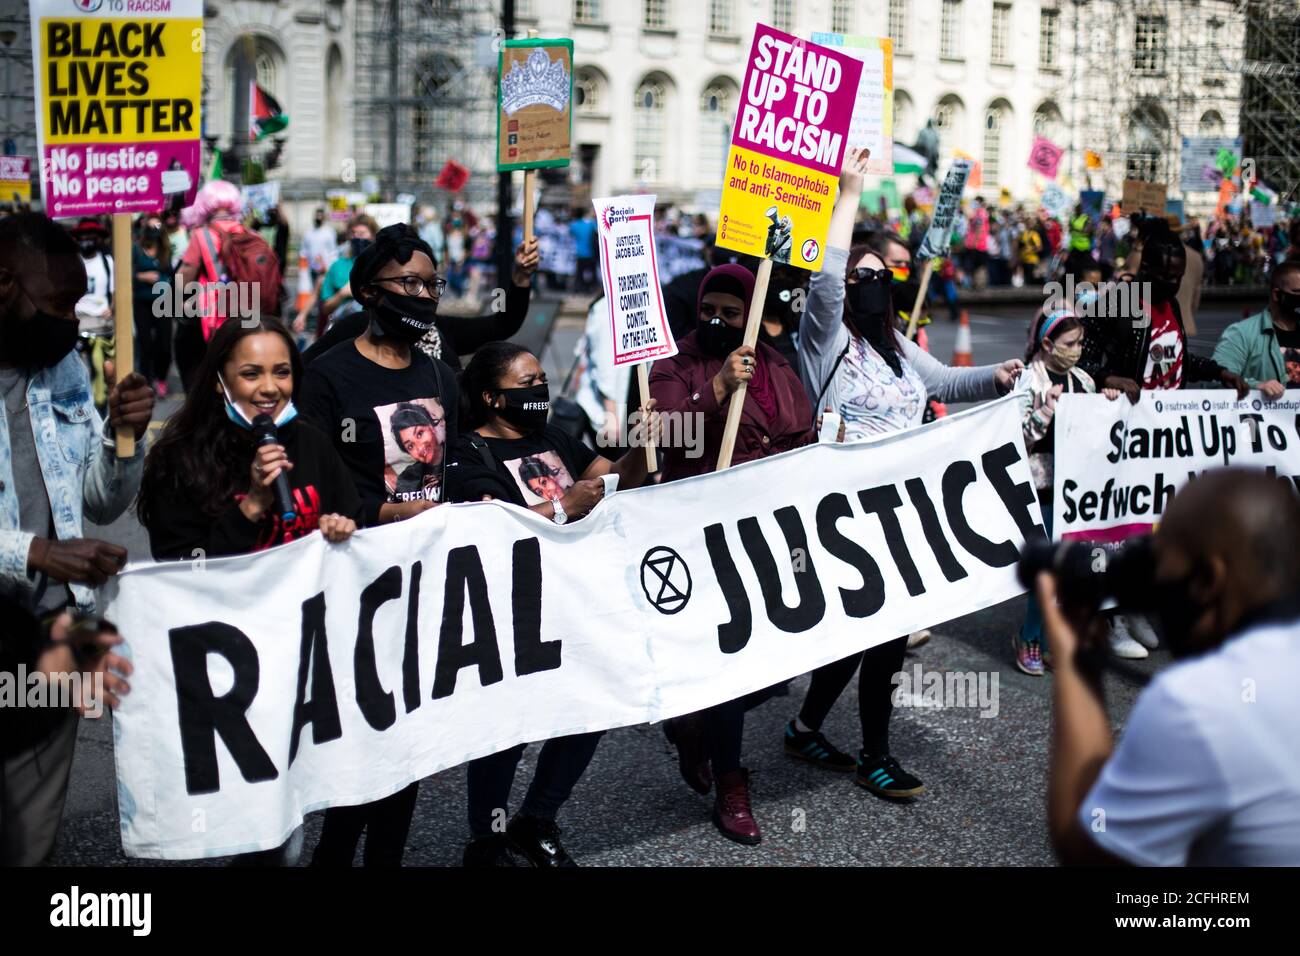 United Kingdom: Cardiff, Wales. Protesters gather and rally for justice and a change in government system at a BLM rally. Stock Photo